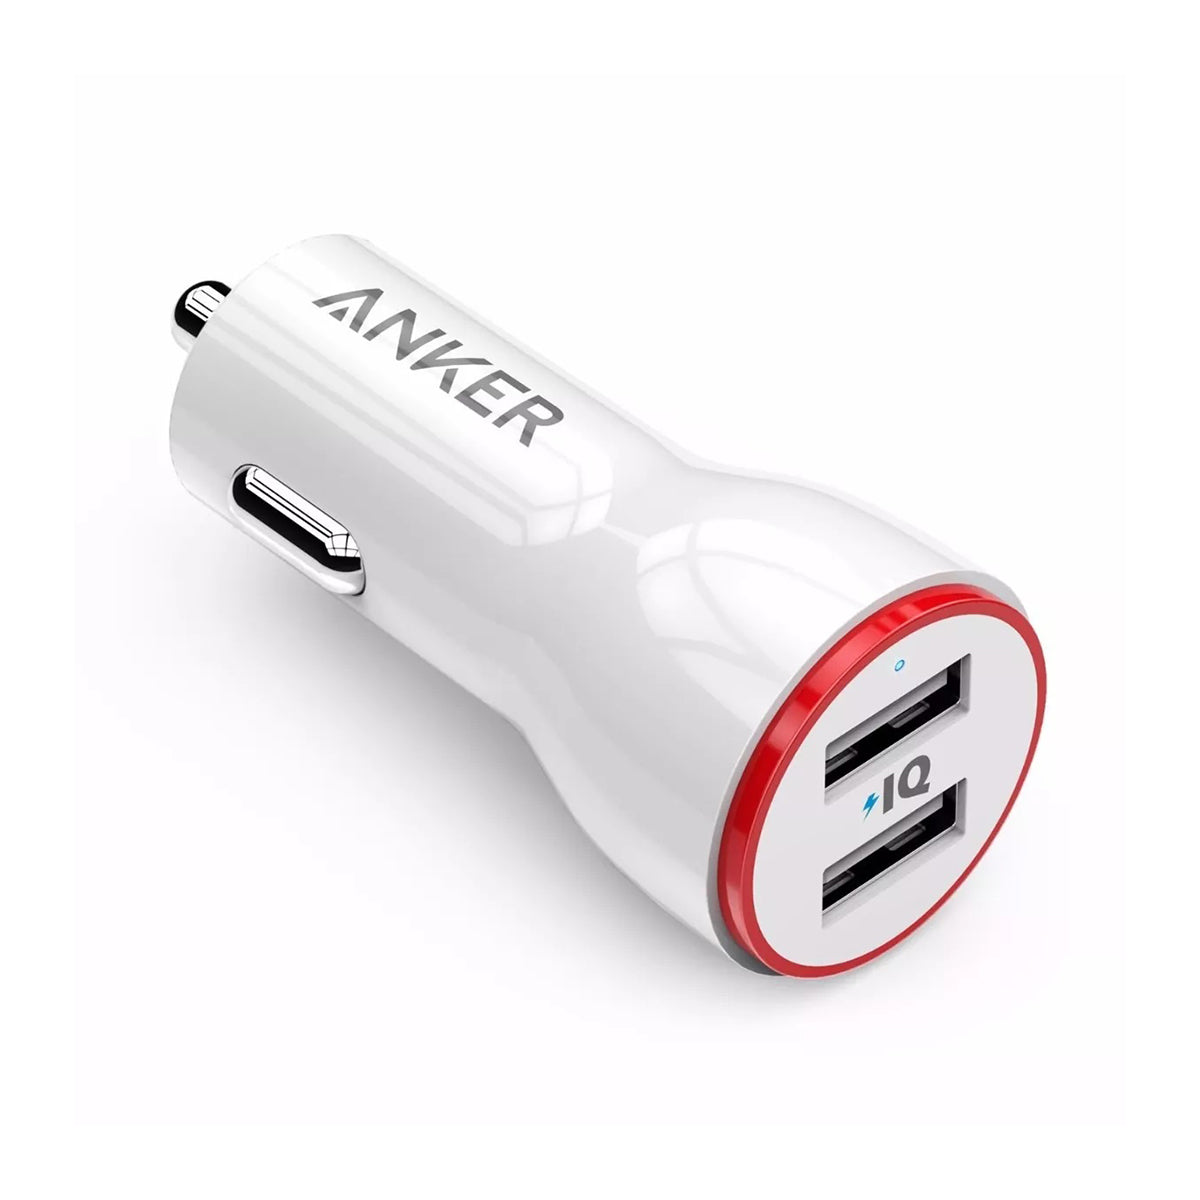 Anker PowerDrive 2 USB-A a Lightning (blanco) Cargador de Vehículo - Anker PowerDrive 2 USB-A to Lightning (White) Vehicle Charger